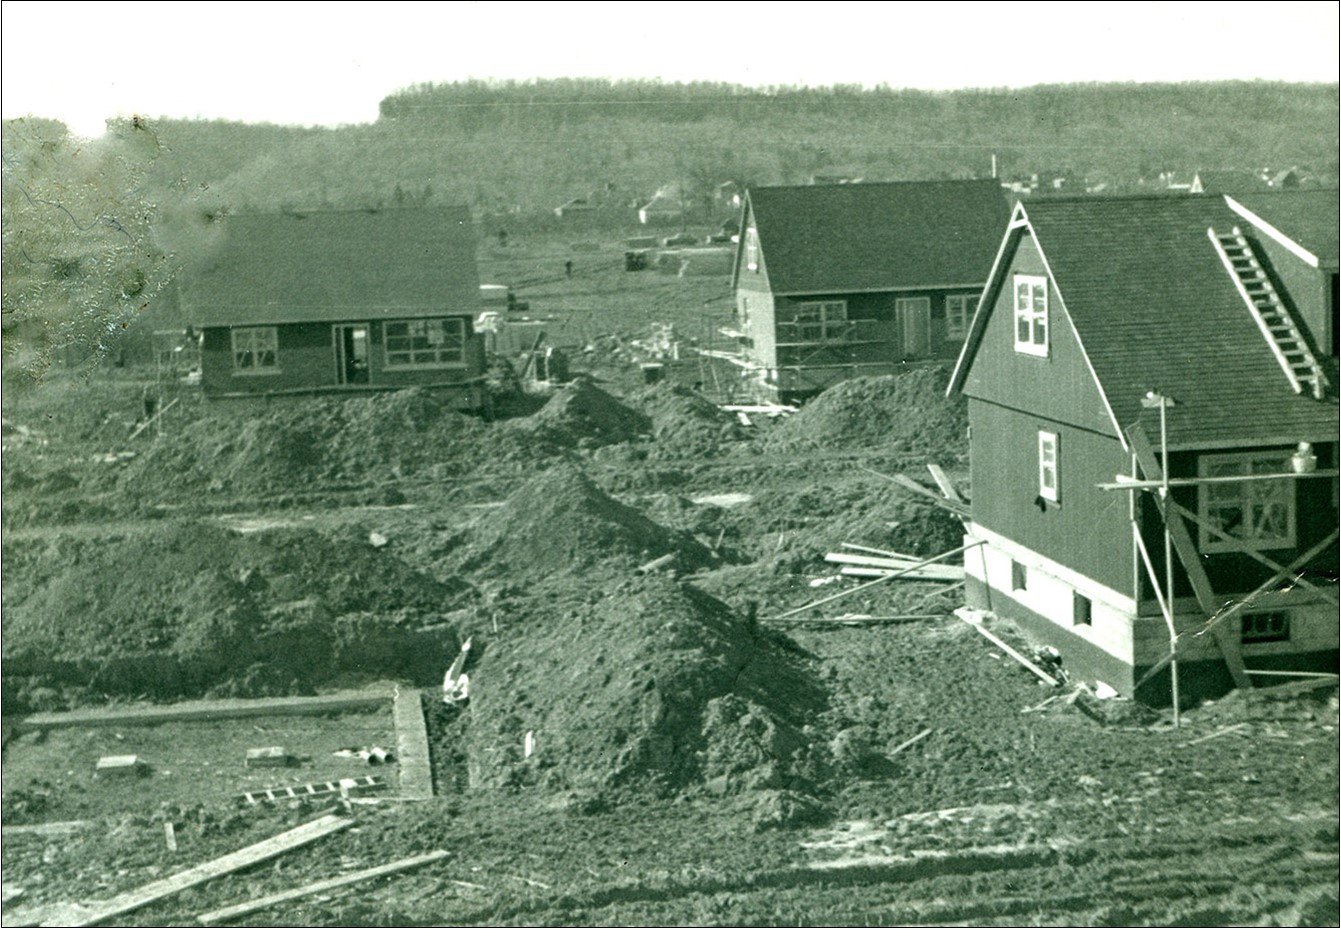 Black and white photograph of homes under construction. Piles of dirt are all around